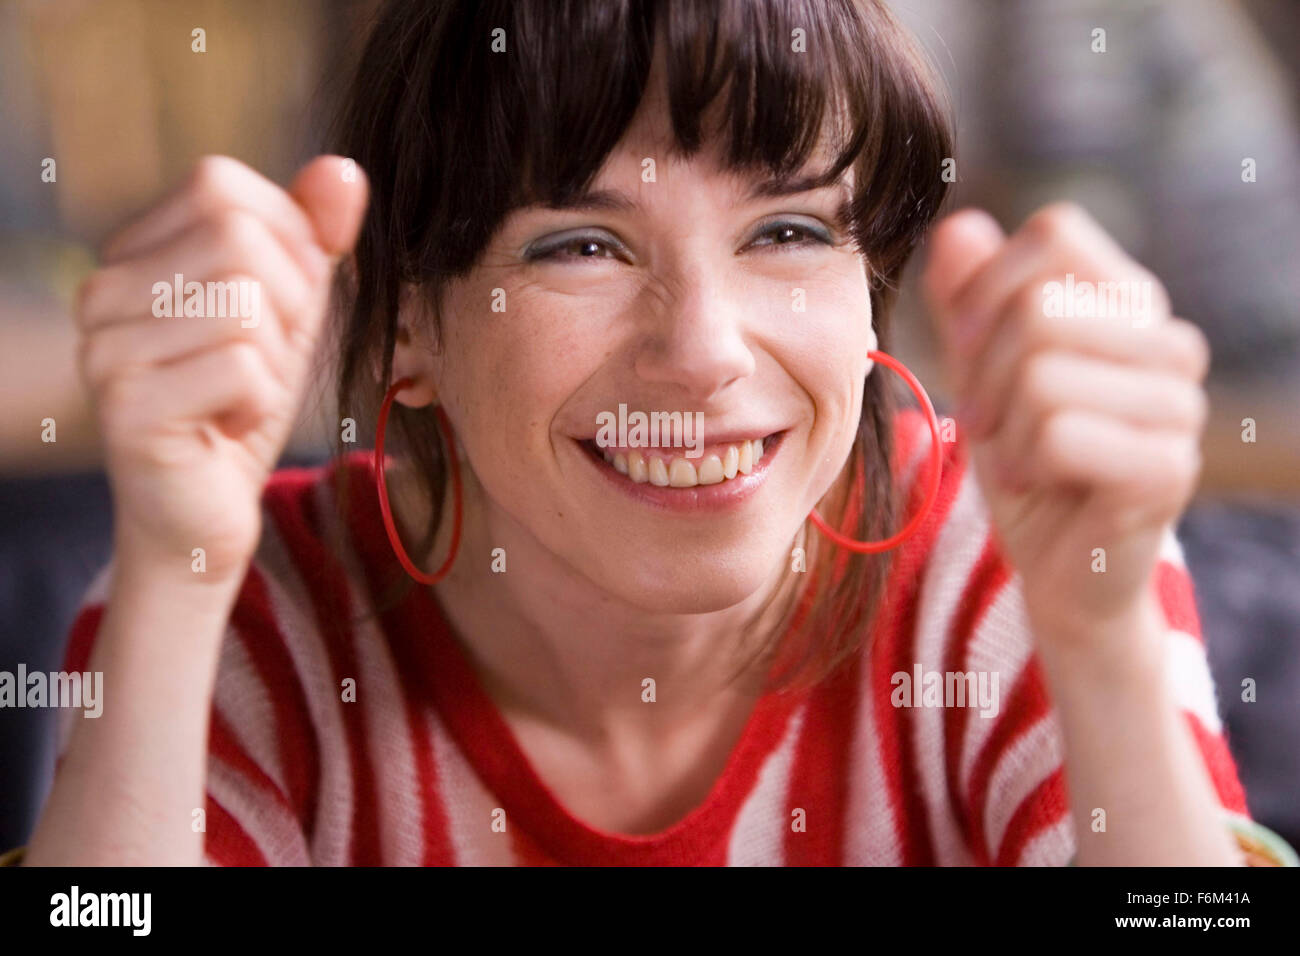 RELEASE DATE: Feb 12, 2008. MOVIE TITLE: Happy-Go-Lucky. STUDIO: Miramax Films. PICTURED: SALLY HAWKINS as Poppy. Stock Photo